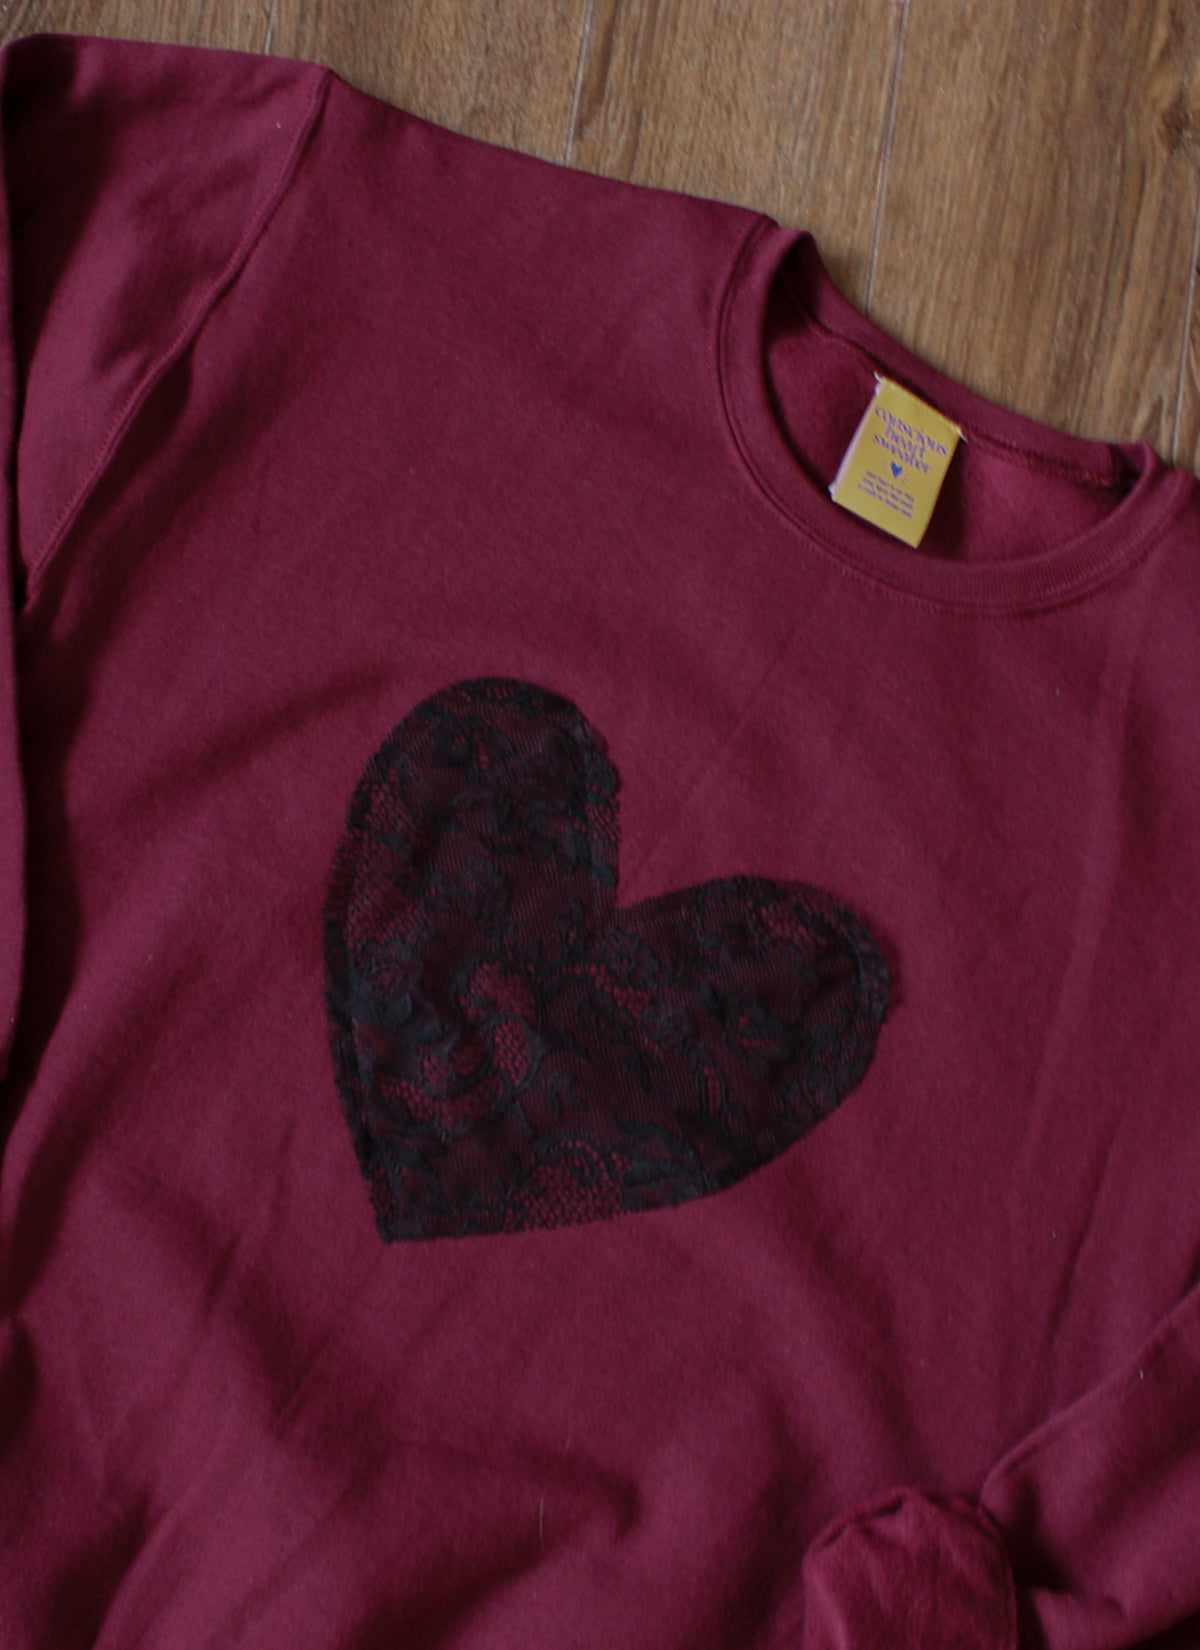 upcycled heart sweater, burgundy and black lace